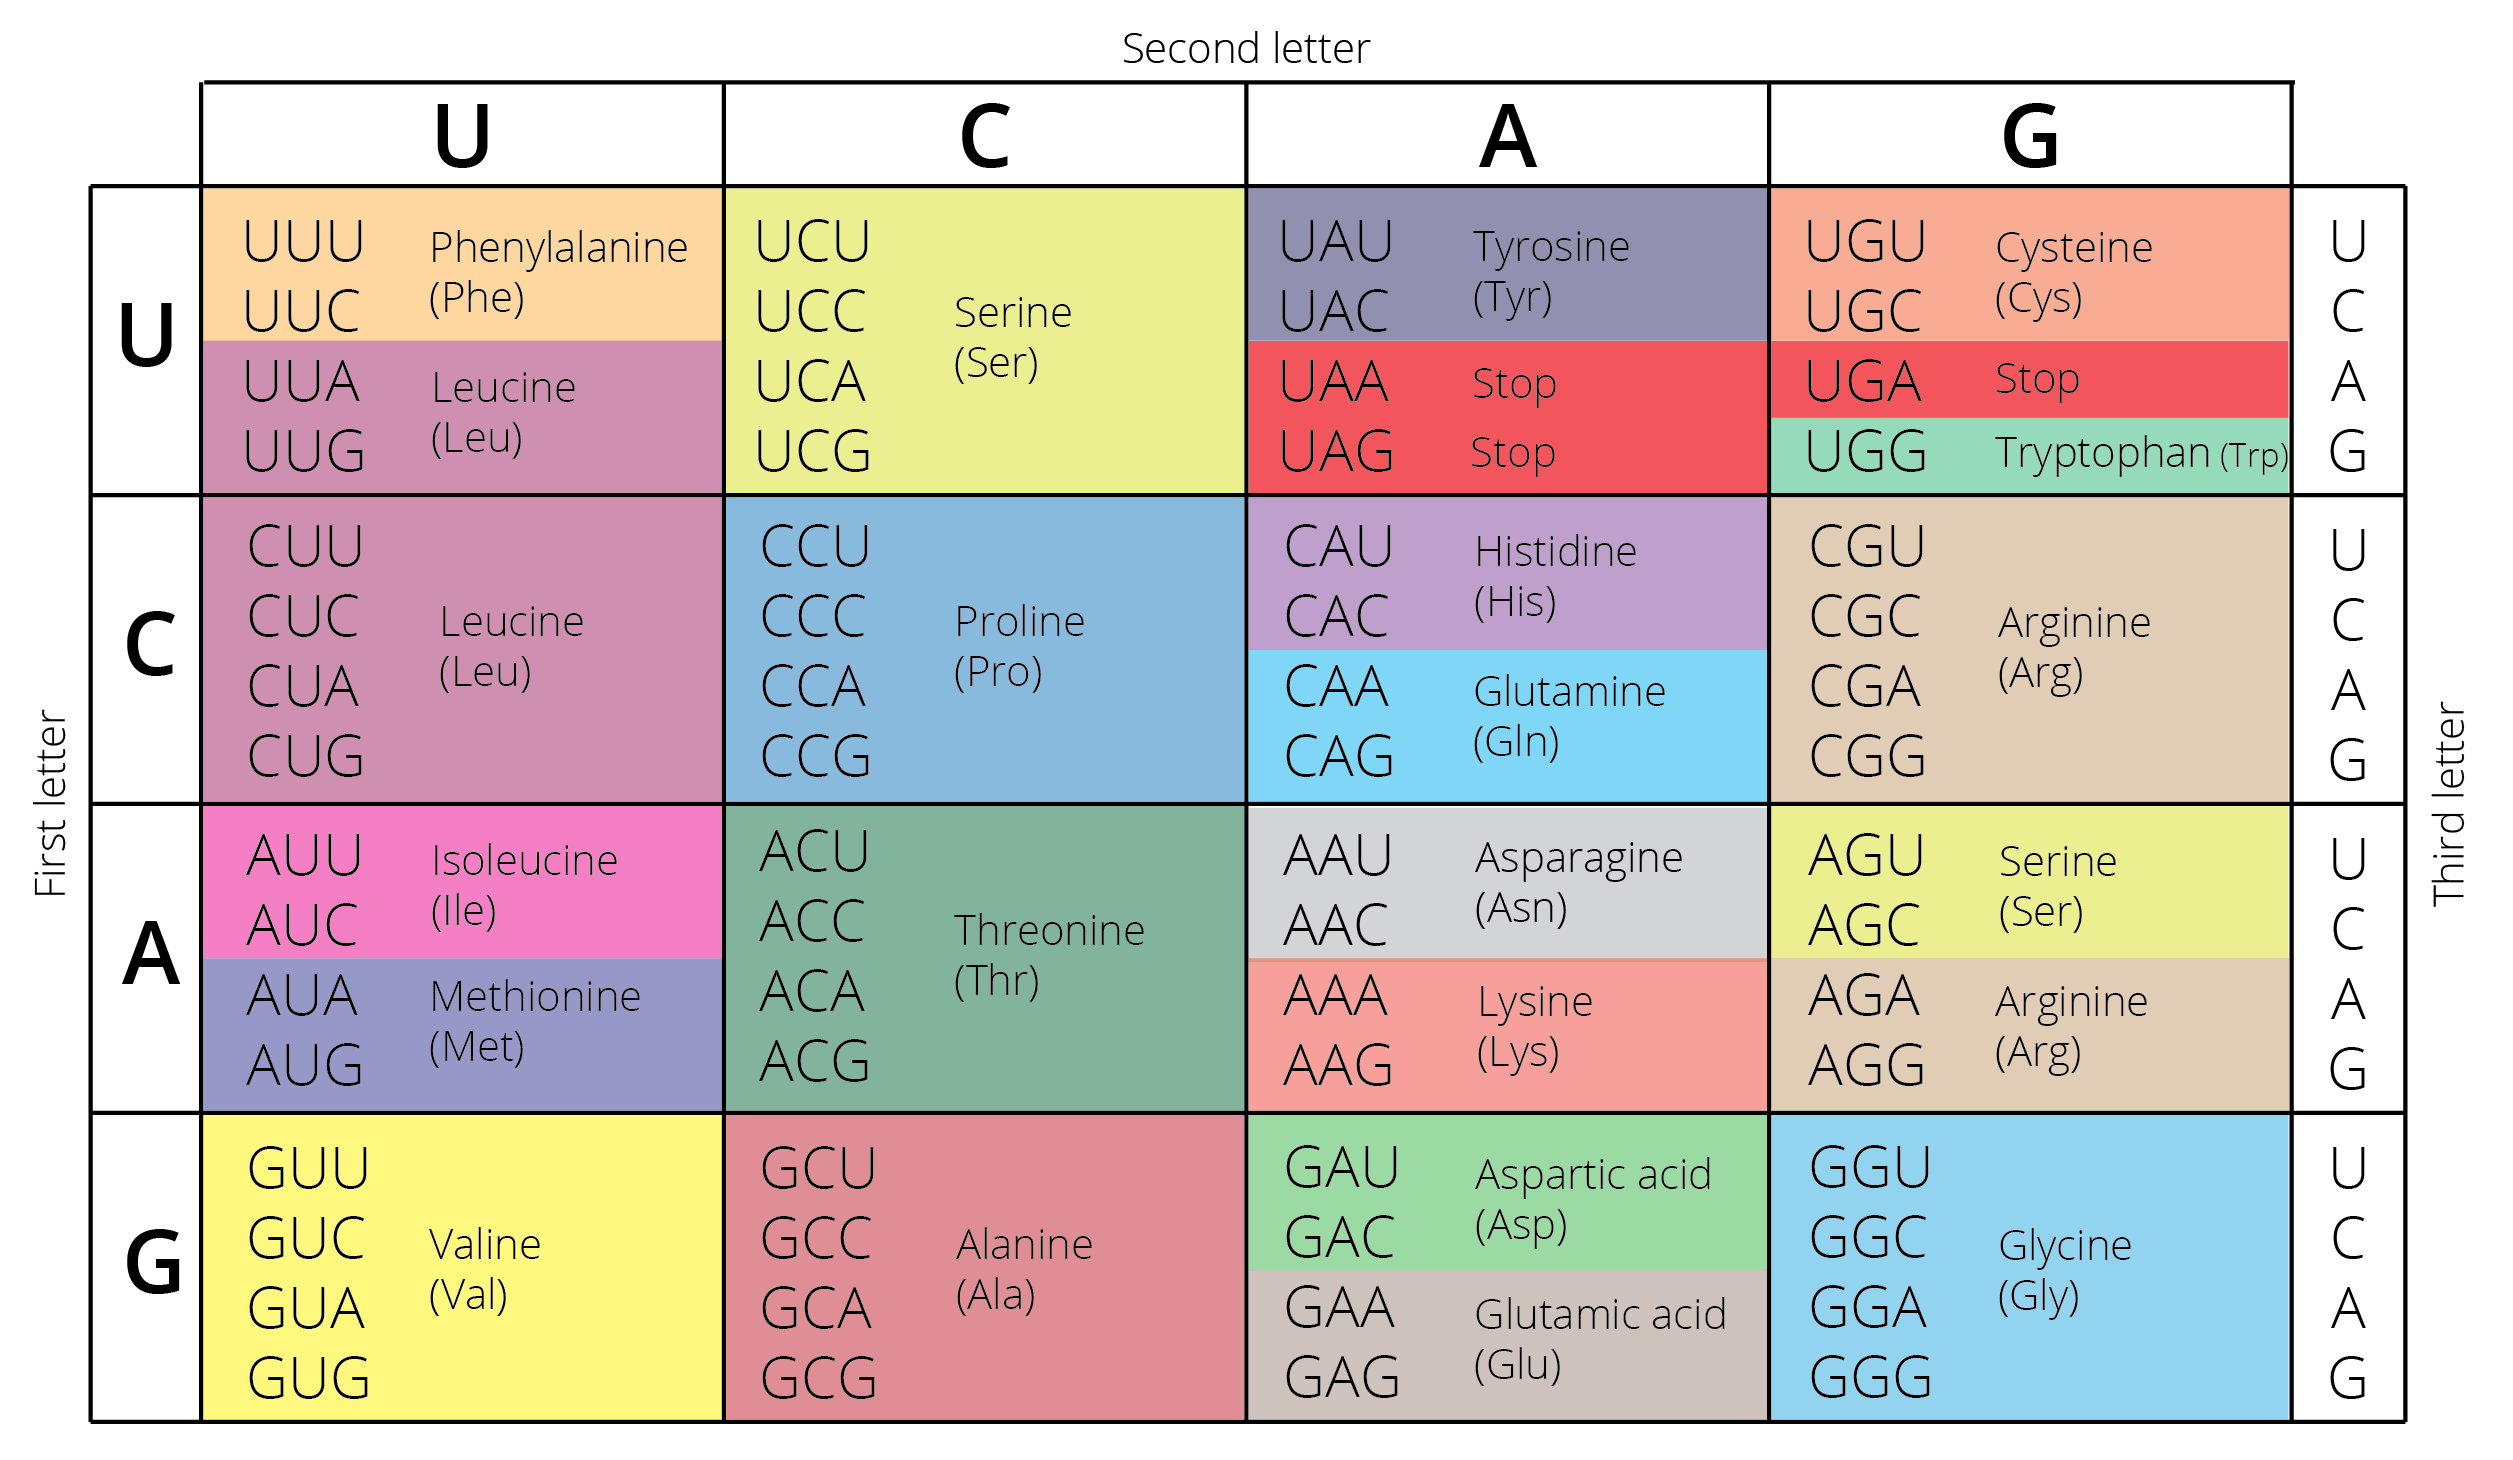 Diagram of the genetic code showing which DNA bases code for which amino acids (in different colors).